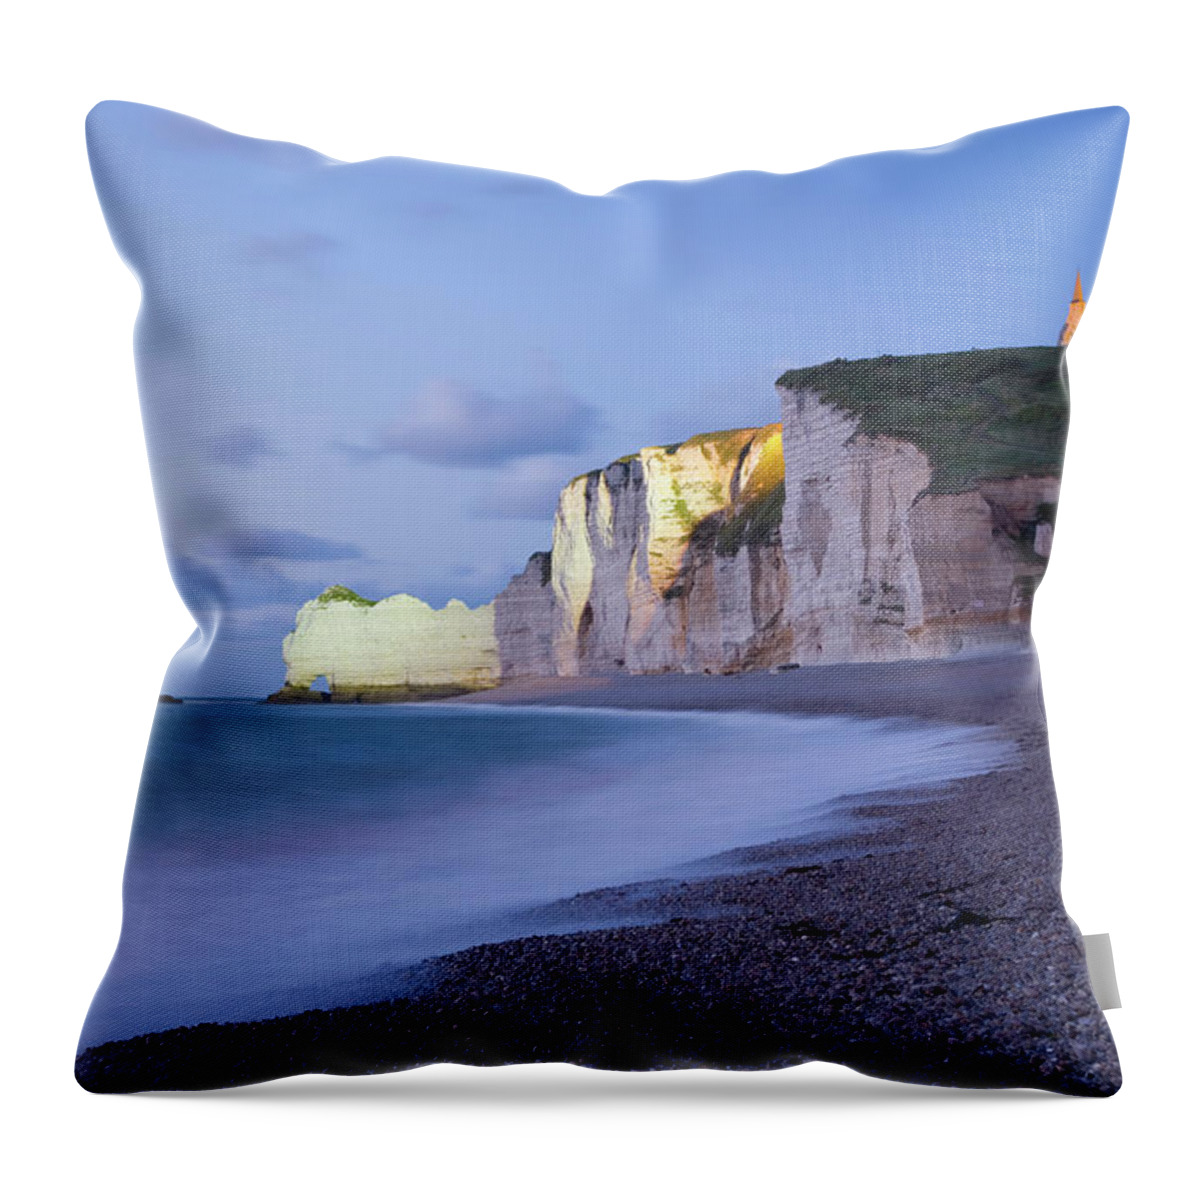 Water's Edge Throw Pillow featuring the photograph Outlook From Shoreline At Dusk To by David C Tomlinson